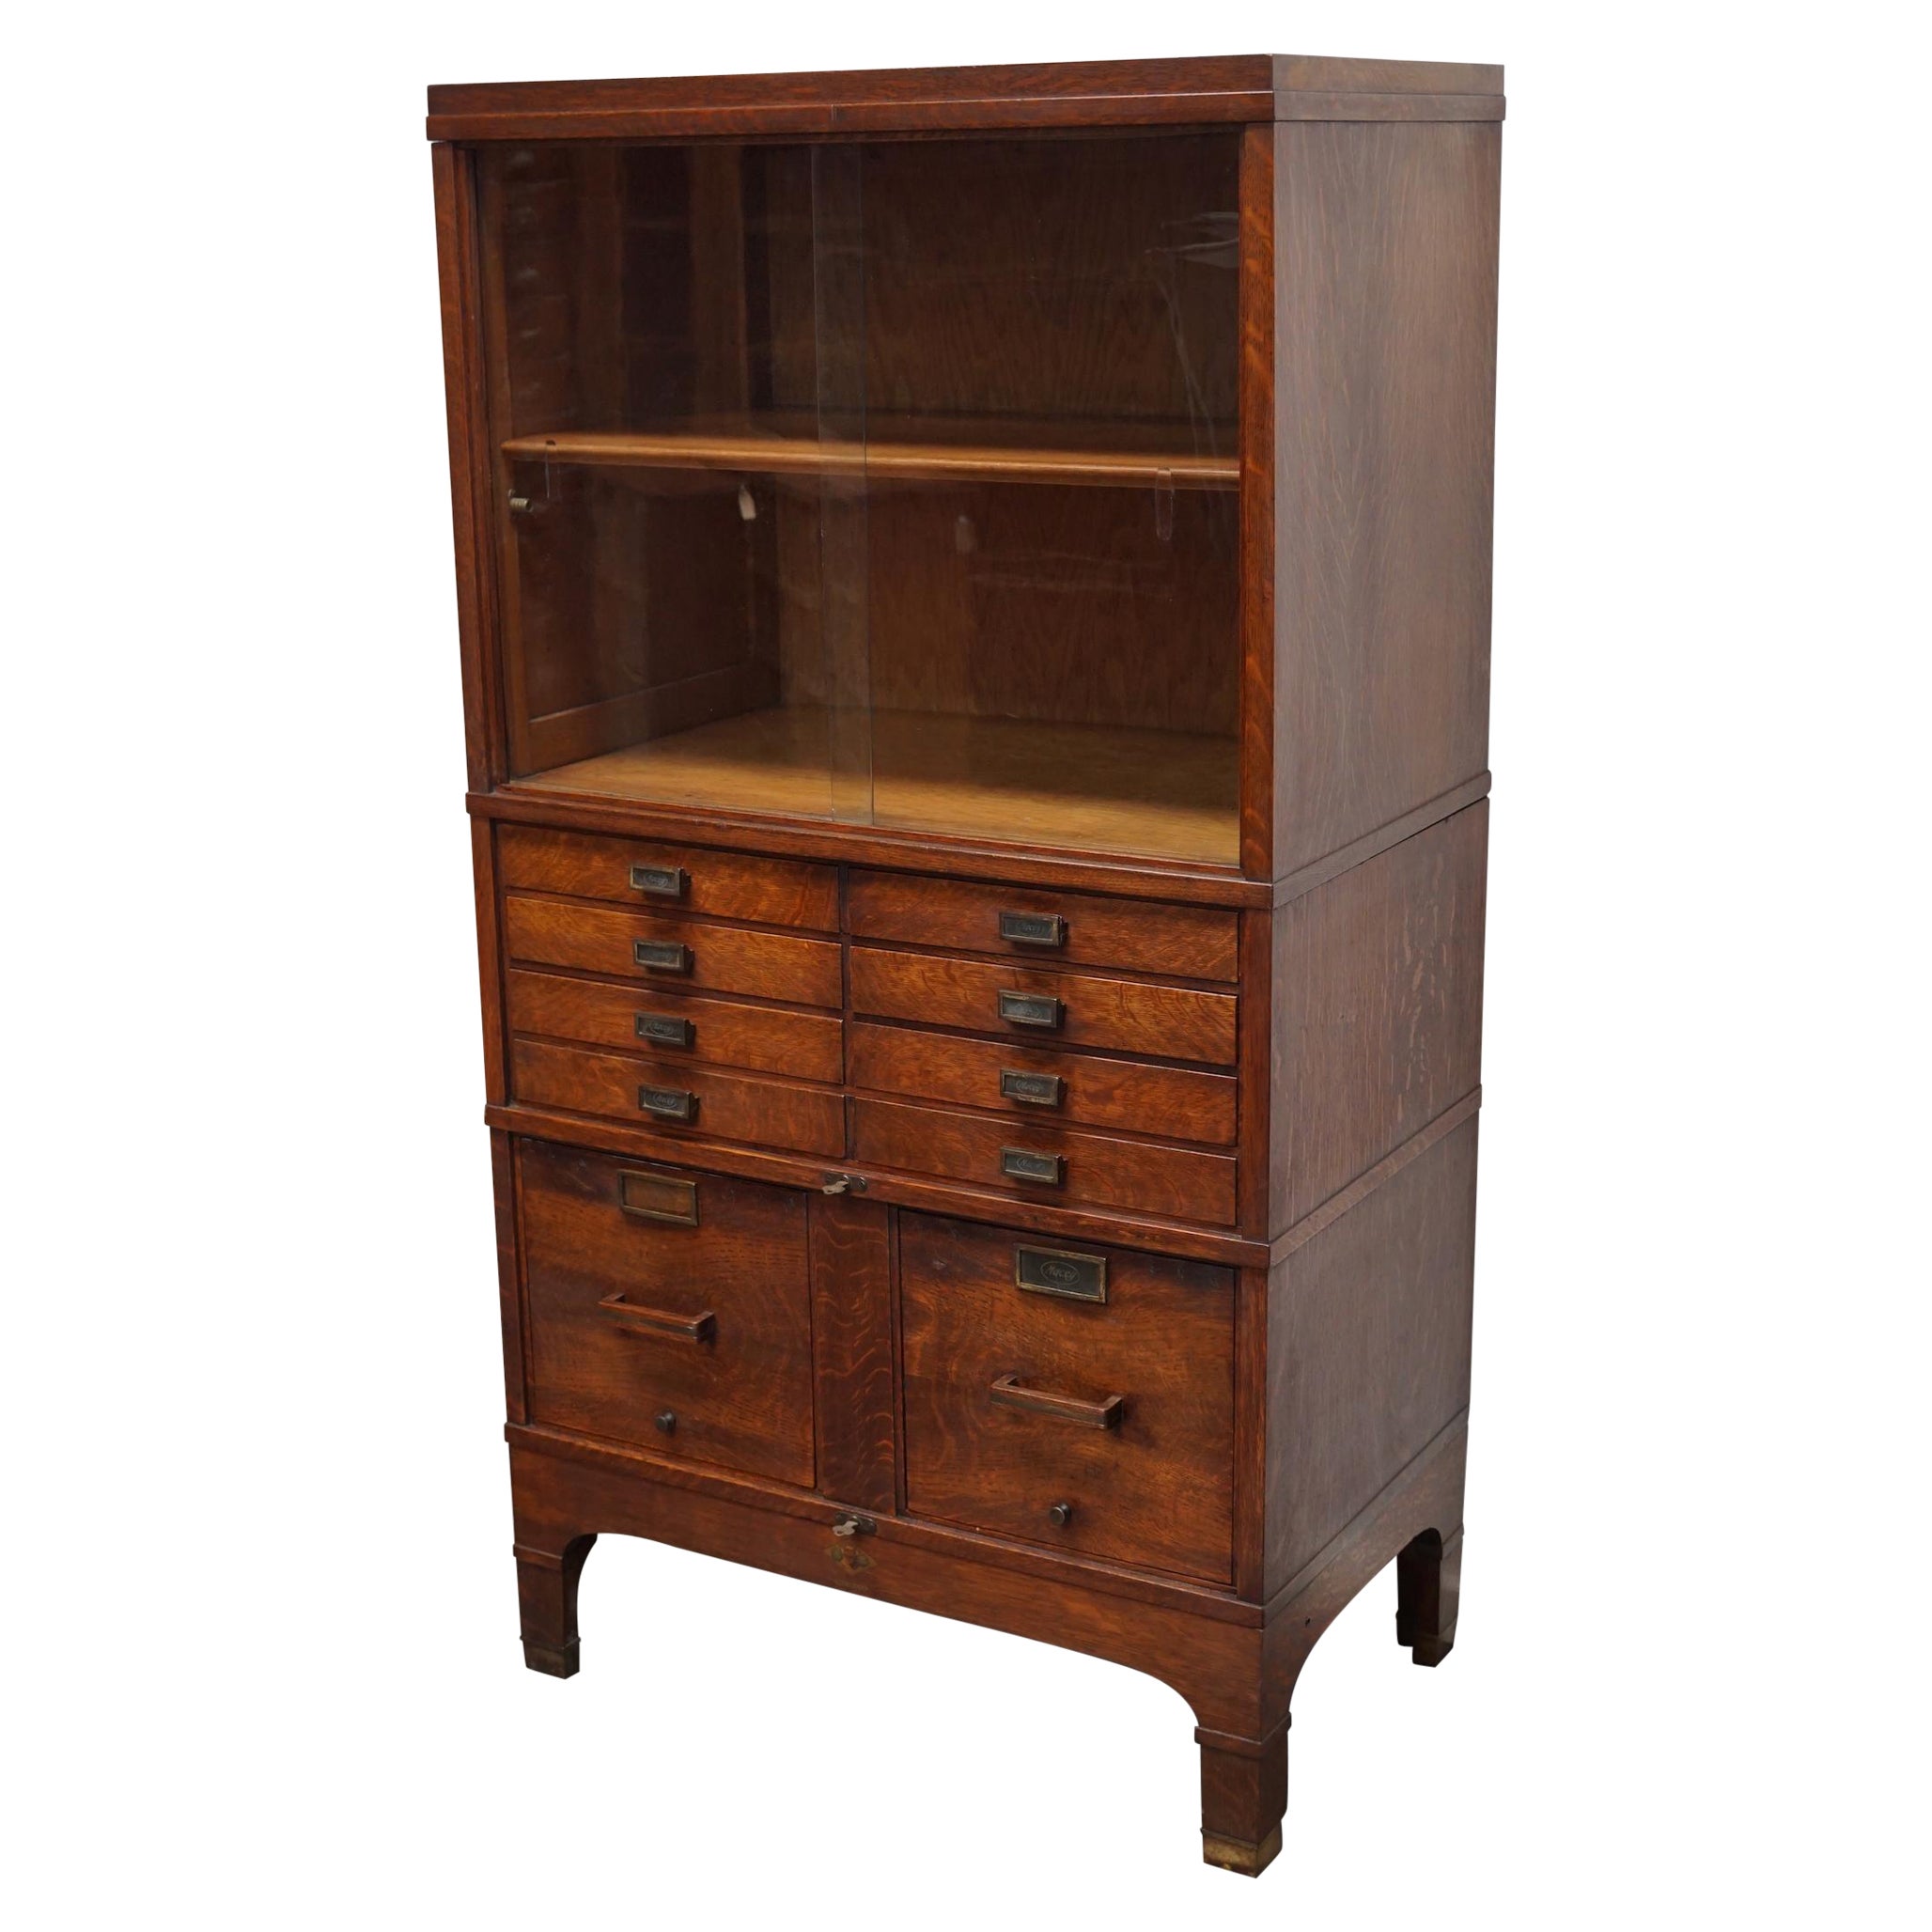 Antique Oak Stacking Bookcase / Filing Cabinet by Macey US, Ca 1920